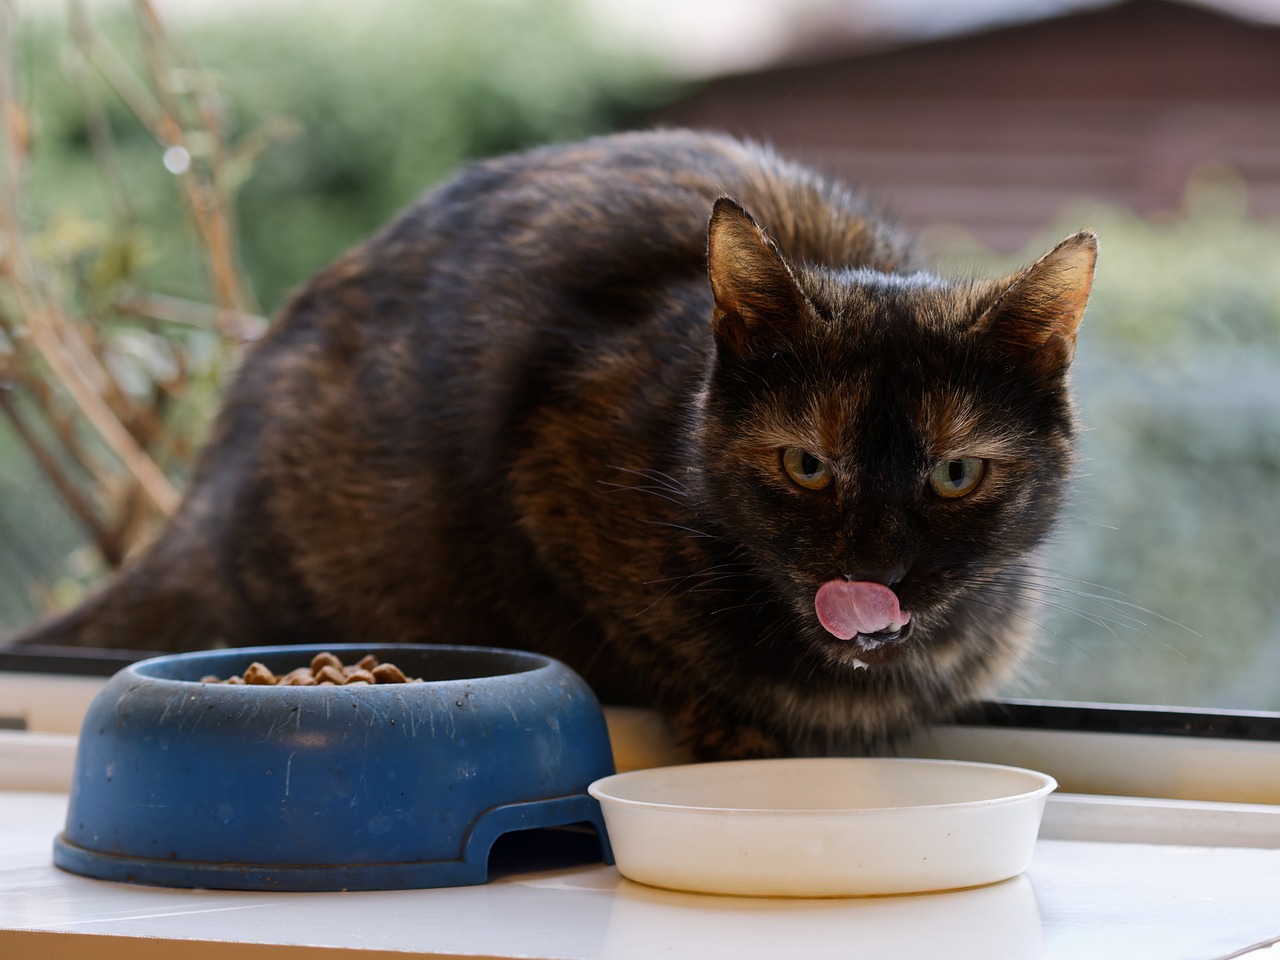 Pet Nutrition - What Should You Not Miss as a Pet Owner?